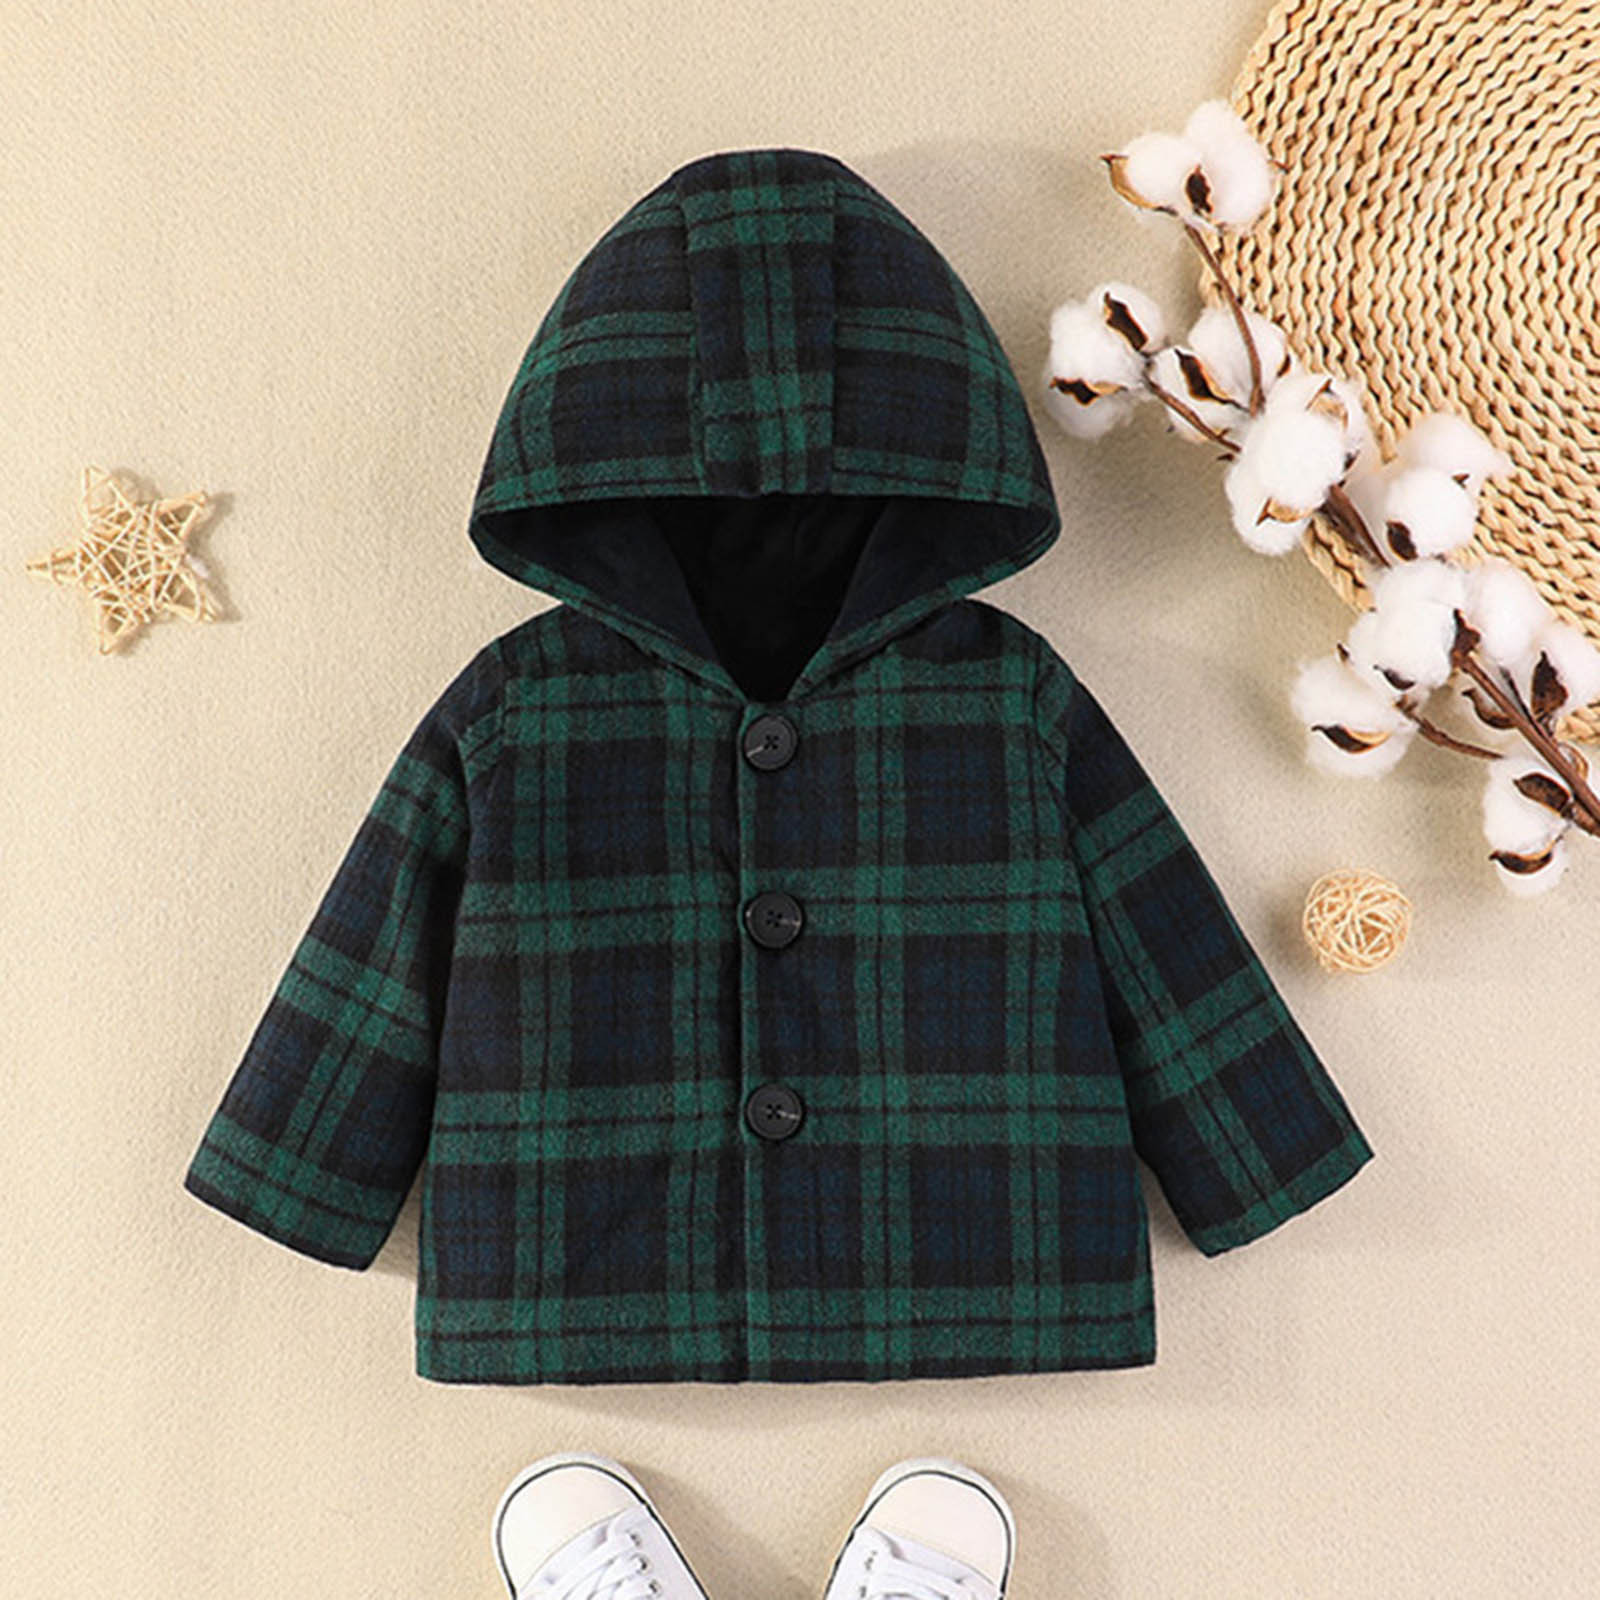 Toddler Fleece Lined Warm Shirt Jacket Autumn Winter Thick Fashion Plaid Long Sleeve Button Belt Hooded Jacket Girls' Casual Hoodie Wool Trench Coat - image 2 of 8